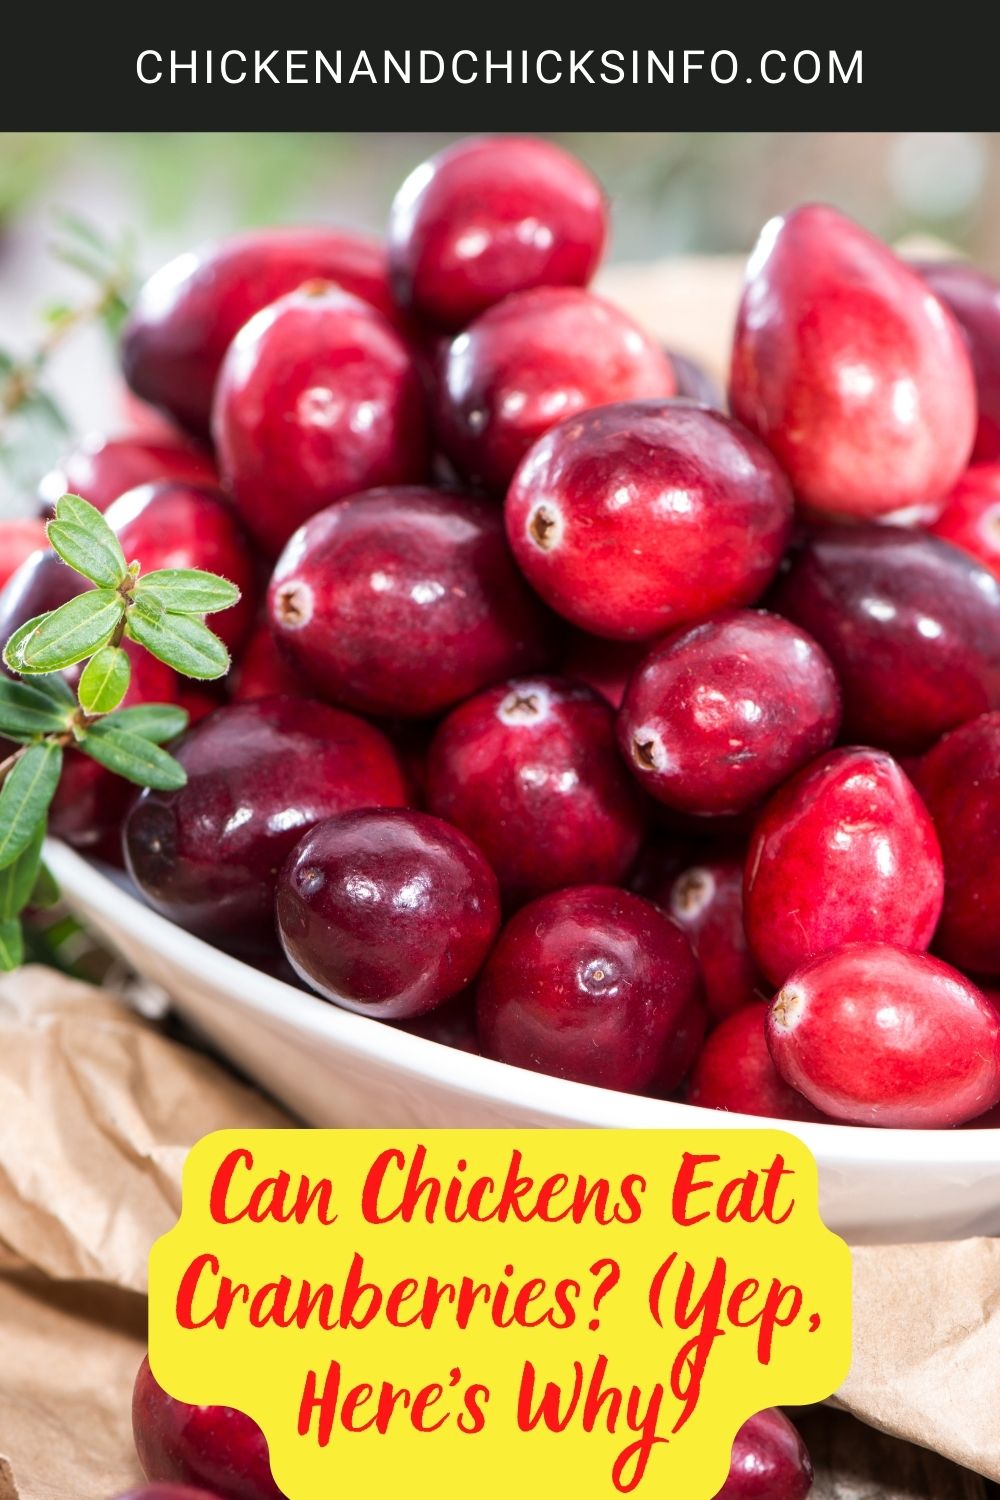 Can Chickens Eat Cranberries? (Yep, Here's Why) poster.
